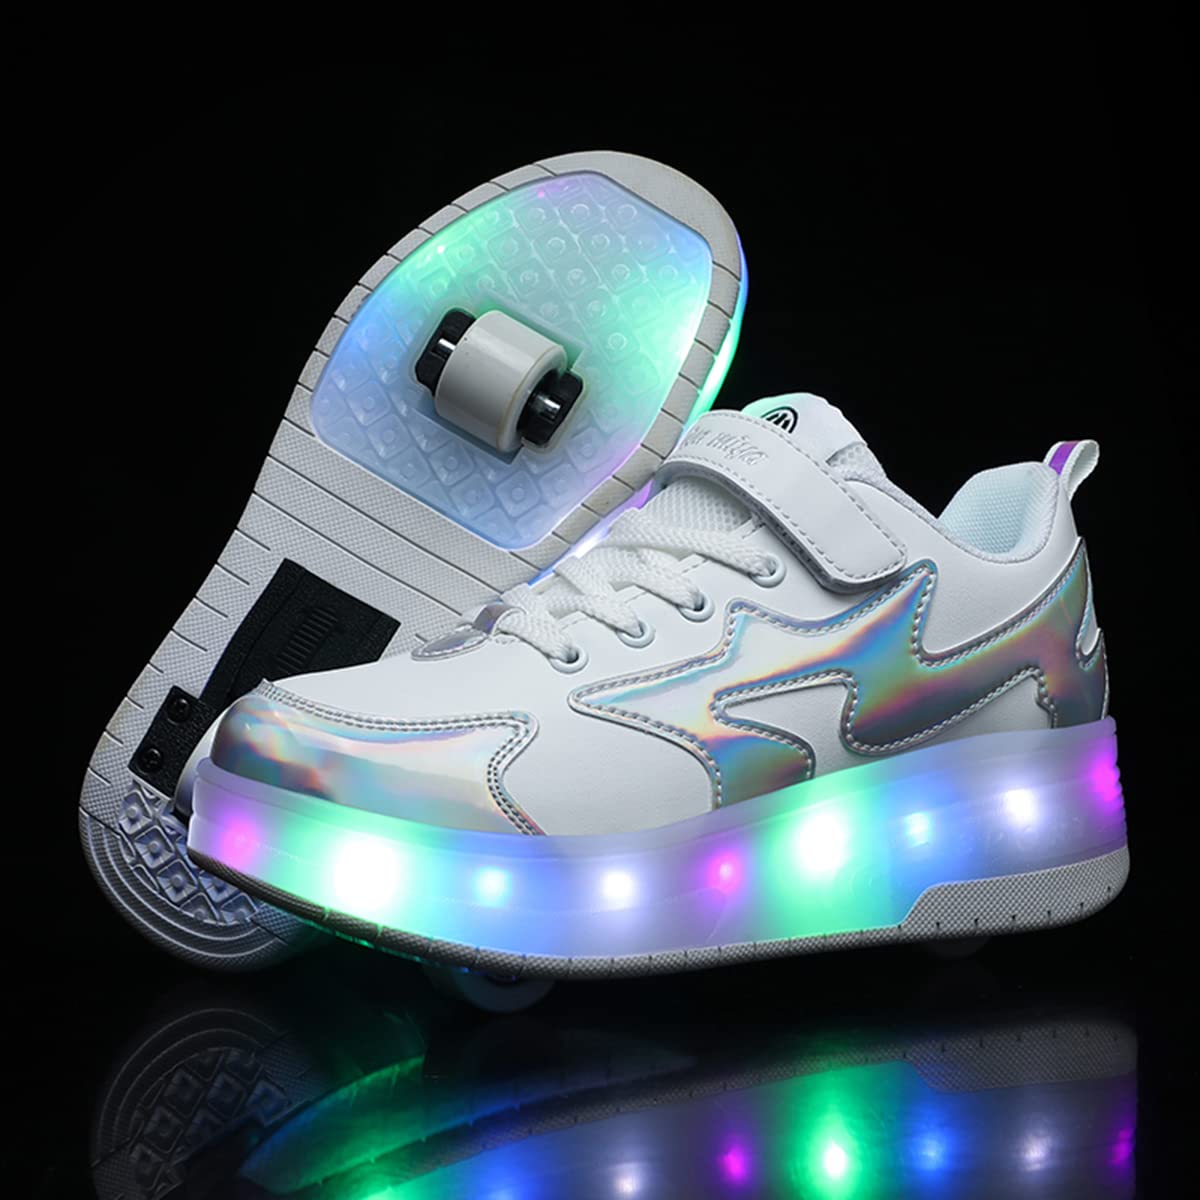 BFOEL Kids Roller Skates Light up Shoes with Double Wheel Shoes LED USB Charging Roller Sneakers for Girls Boys Birthday Christmas Day Best Gift